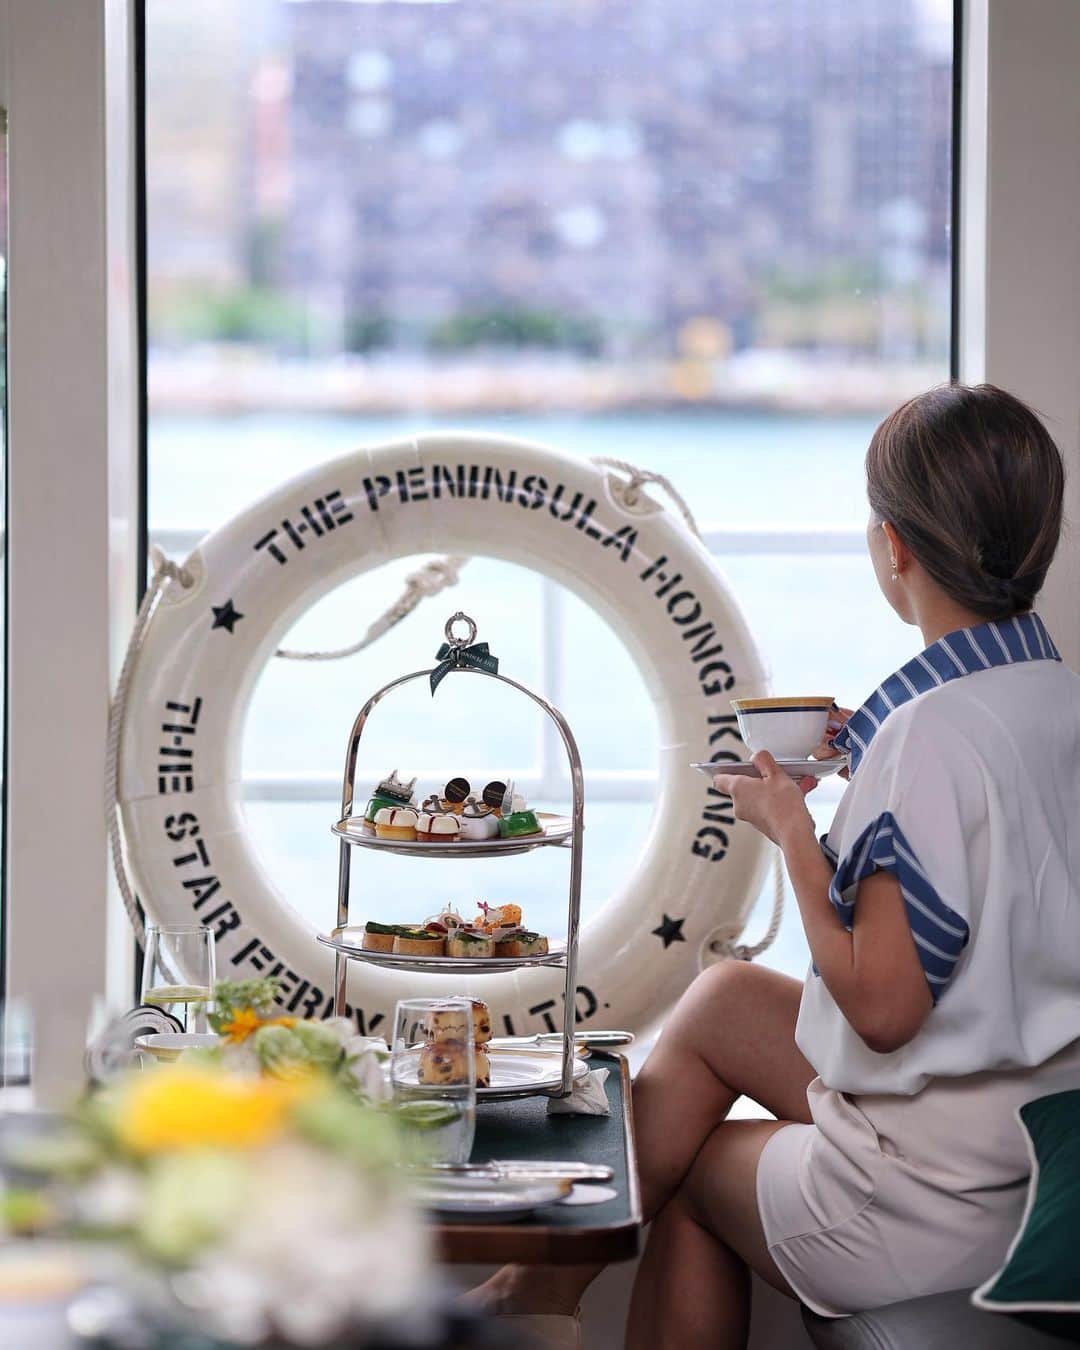 Discover Hong Kongさんのインスタグラム写真 - (Discover Hong KongInstagram)「What’s more relaxing than an afternoon tea☕ enjoyed on the Star Ferry⛴️?  Hop on board the lavishly outfitted ferry “World Star” for an unforgettable afternoon tea voyage, exclusively available on Saturdays, Sundays and public holidays from 31 Mar to 2 Jul. Setting out from Tsim Sha Tsui Pier, the two-hour floating journey will cruise through Victoria Harbour, taking you to waterfront gems like the West Kowloon Cultural District and Stonecutters Island. Immerse yourself in an array of sweet and savoury bites, stunning harbour views and live music! 🎶  ⛴️The Peninsula Afternoon Tea on the Harbour 🔗For details and reservation, please visit @peninsulahongkong!  點為之最Chill嘅High Tea？就係坐住天星小輪⛴️嘆下午茶☕！  兩小時海上之旅由尖沙嘴碼頭出發，經過西九文化區同昂船洲海濱，一邊喺裝潢精美嘅「世星號」享用精緻甜品同鹹點， 一邊欣賞維港靚景，配合現場音樂演奏🎶，絕對係難忘體驗！   想體驗浪漫維港之旅，記得喺3月31至7月2日期間嘅週末同公眾假期揀定日子啦！☺️  ⛴️維港半島經典下午茶 🔗預訂請瀏覽👉🏻@peninsulahongkong  ⛴️🥳⛴️🥳⛴️🥳⛴️🥳⛴️🥳⛴️🥳⛴️🥳⛴️🥳⛴️🥳⛴️🥳 Hong Kong welcomes you✈️! Now travellers can get ‘Hong Kong Goodies’ 🛍️vouchers including one FREE welcome drink🍸 in the hottest bars! Check out the details here: bit.ly/HelloHKgoodiesEN. Hope to see you all soon! 香港歡迎你✈️！而家遊客仲可以享用「香港有禮🛍️」消費優惠券，去得獎酒吧免費飲返杯🍸🍹！詳情請留意 bit.ly/HelloHKgoodiesTC #DiscoverHongKong #HelloHongKong」3月29日 20時10分 - discoverhongkong